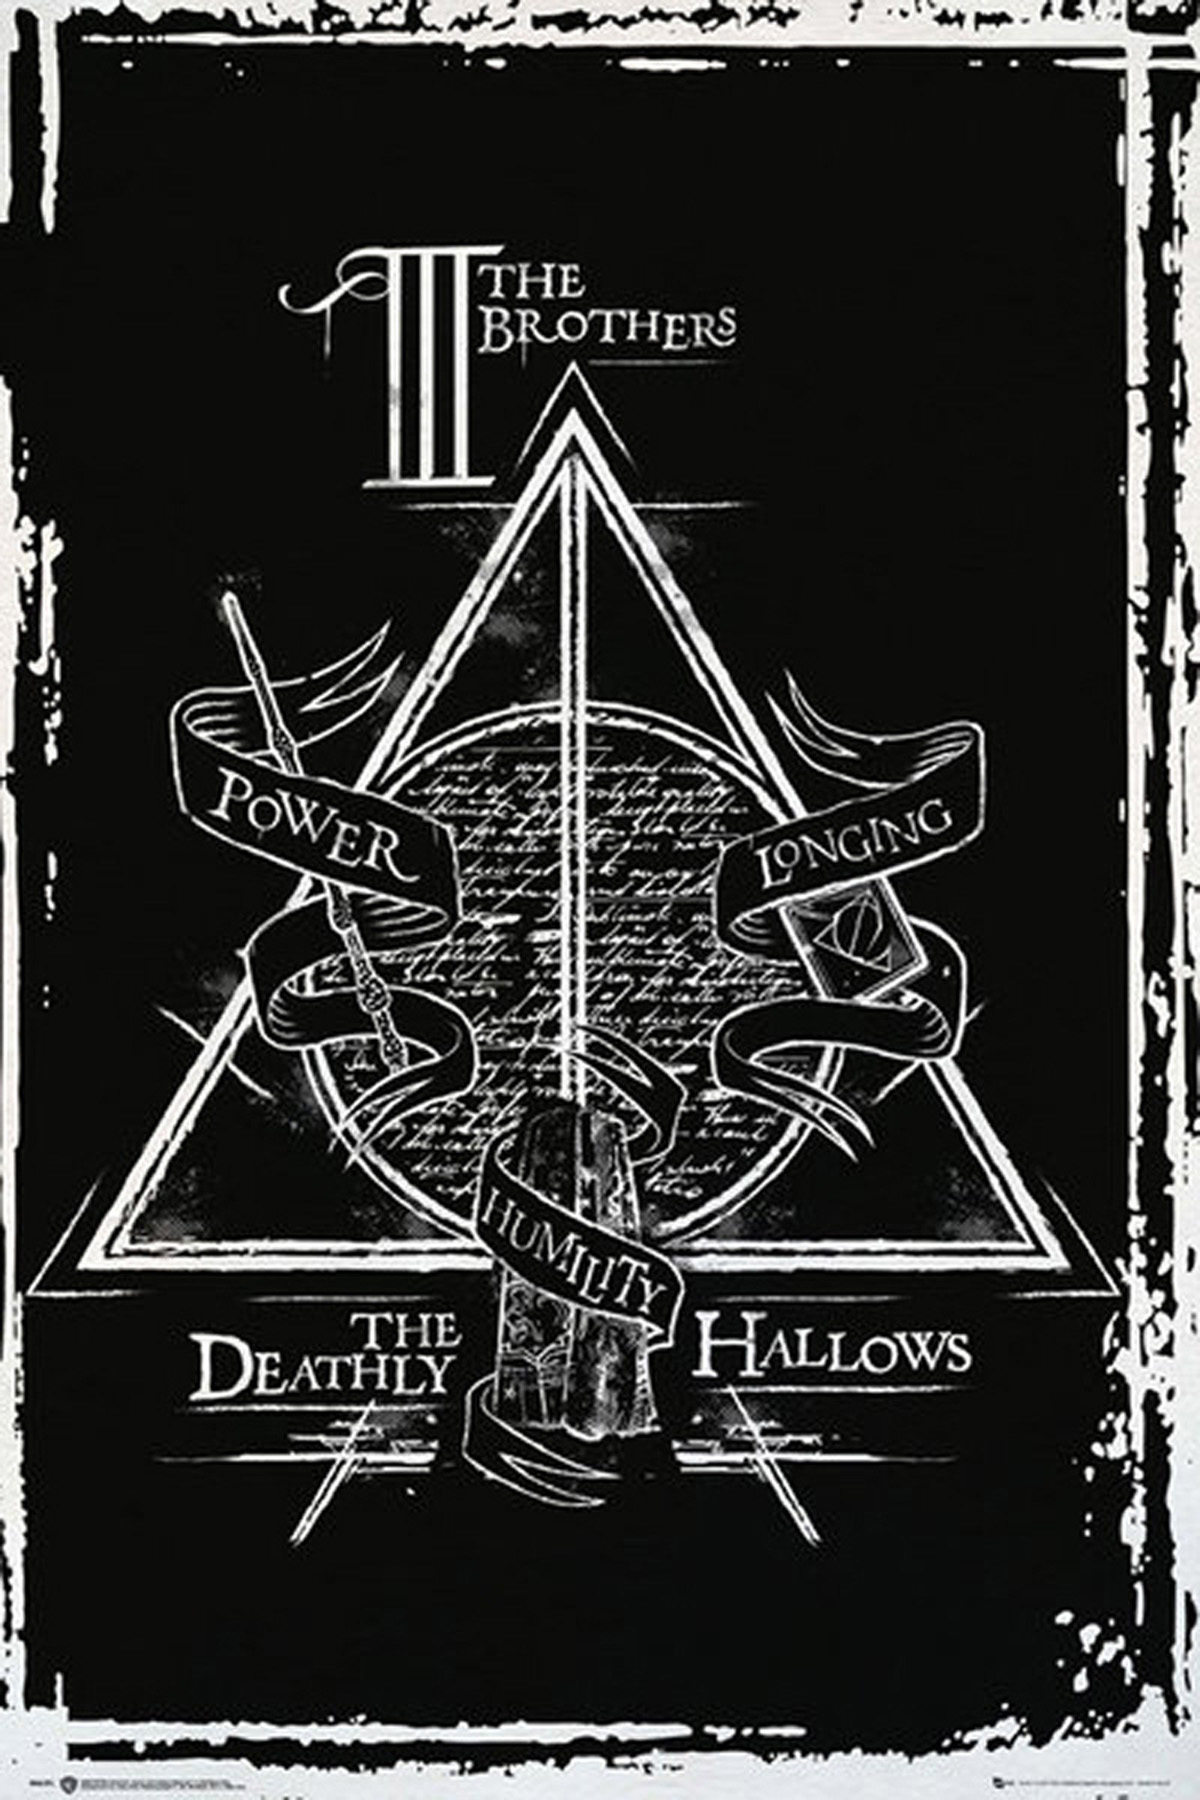 Graphic Deathly Harry Potter - Hallows